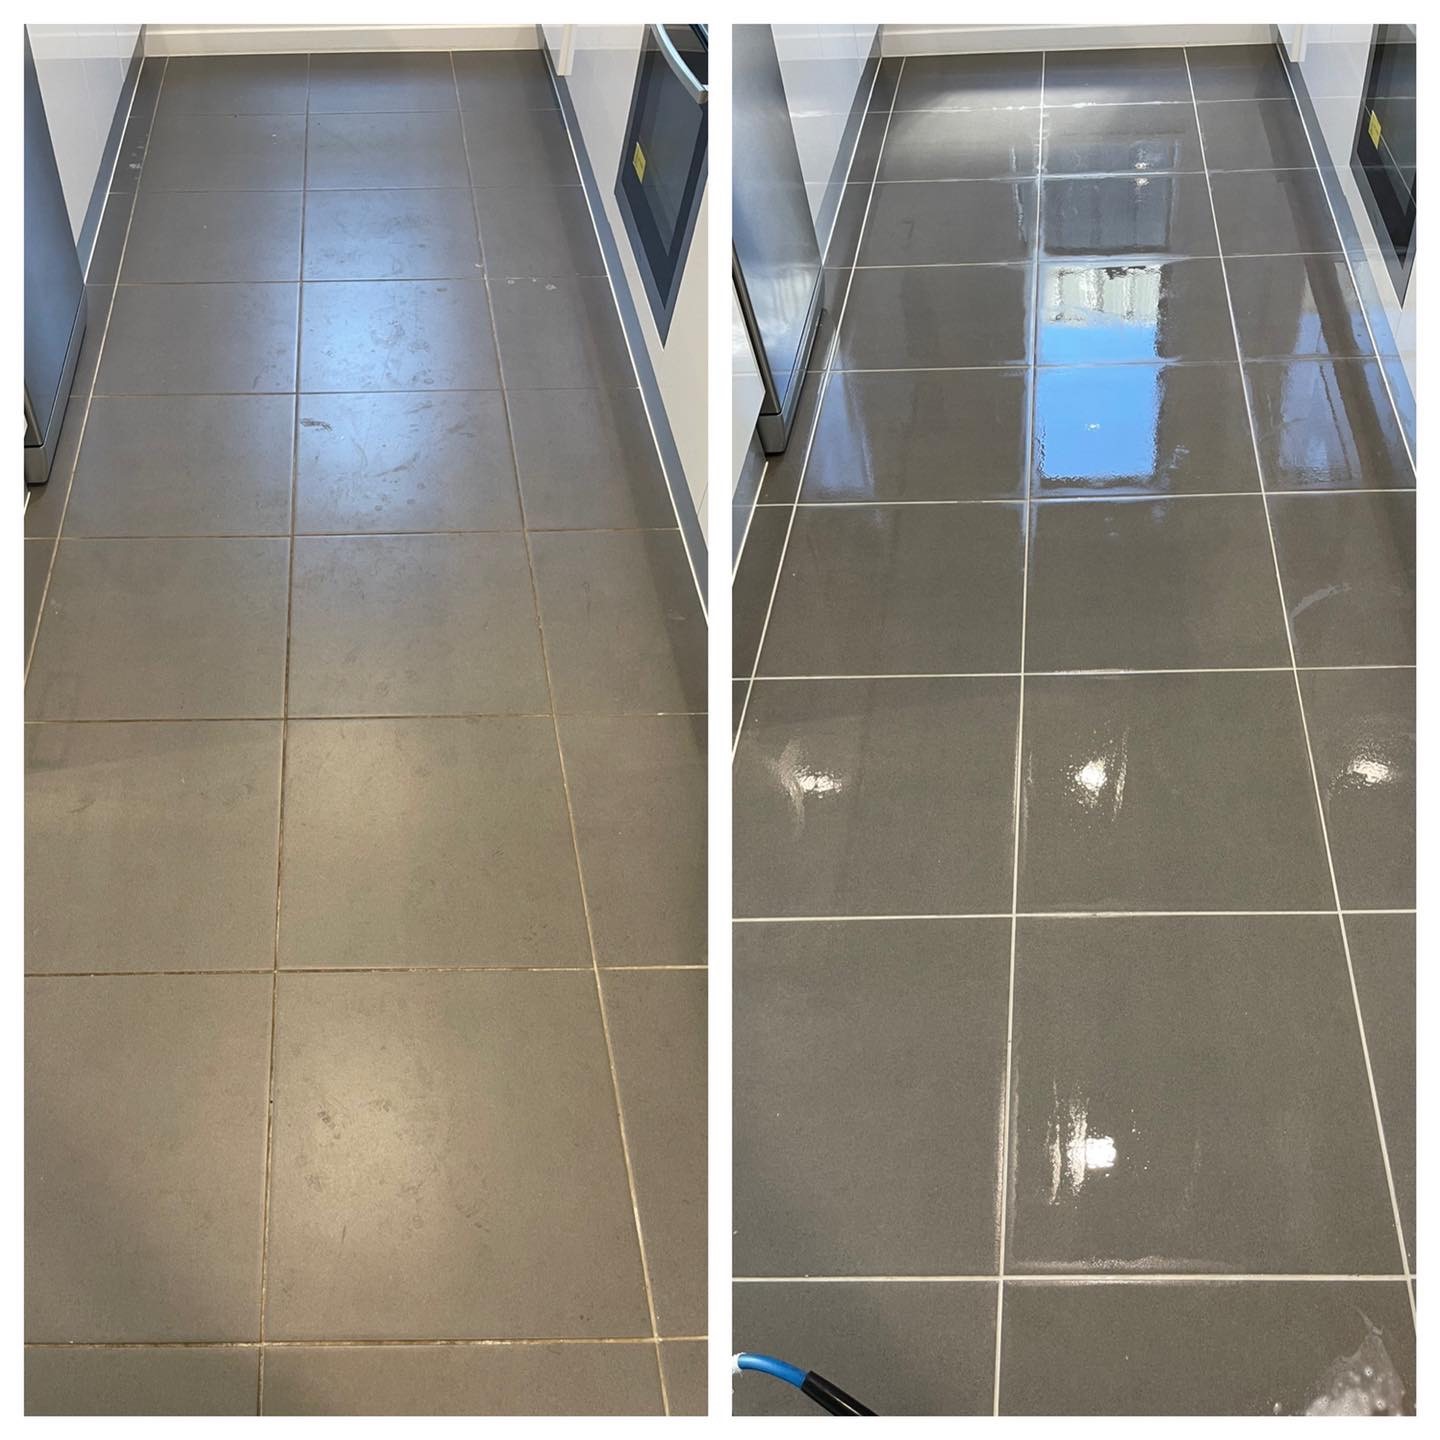 Before/after example 5 - clean tiles Hunter Valley NSW